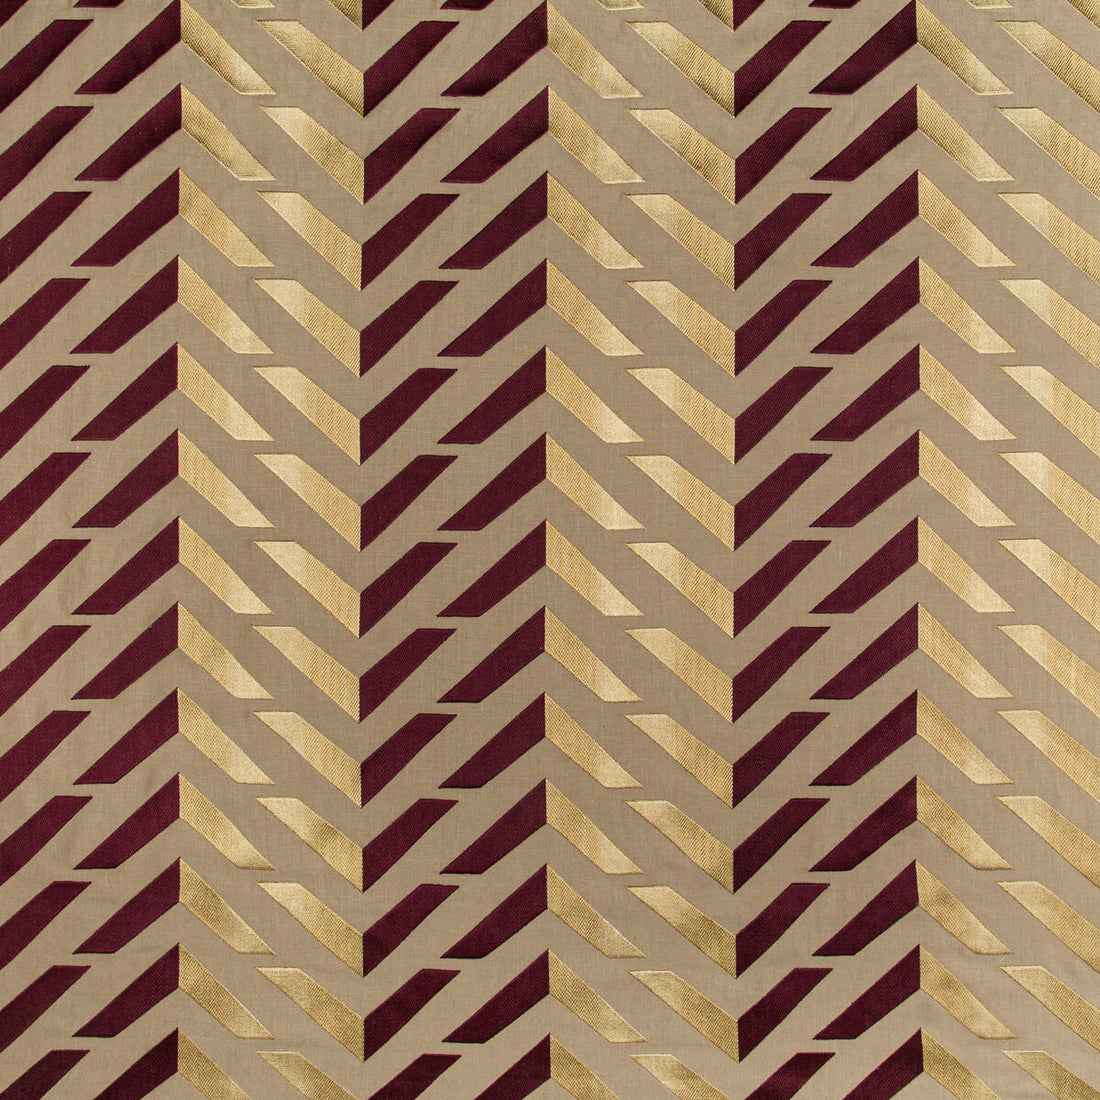 Les Vagues Emb fabric in plum/gold color - pattern 8017128.9094.0 - by Brunschwig &amp; Fils in the Les Ensembliers II collection